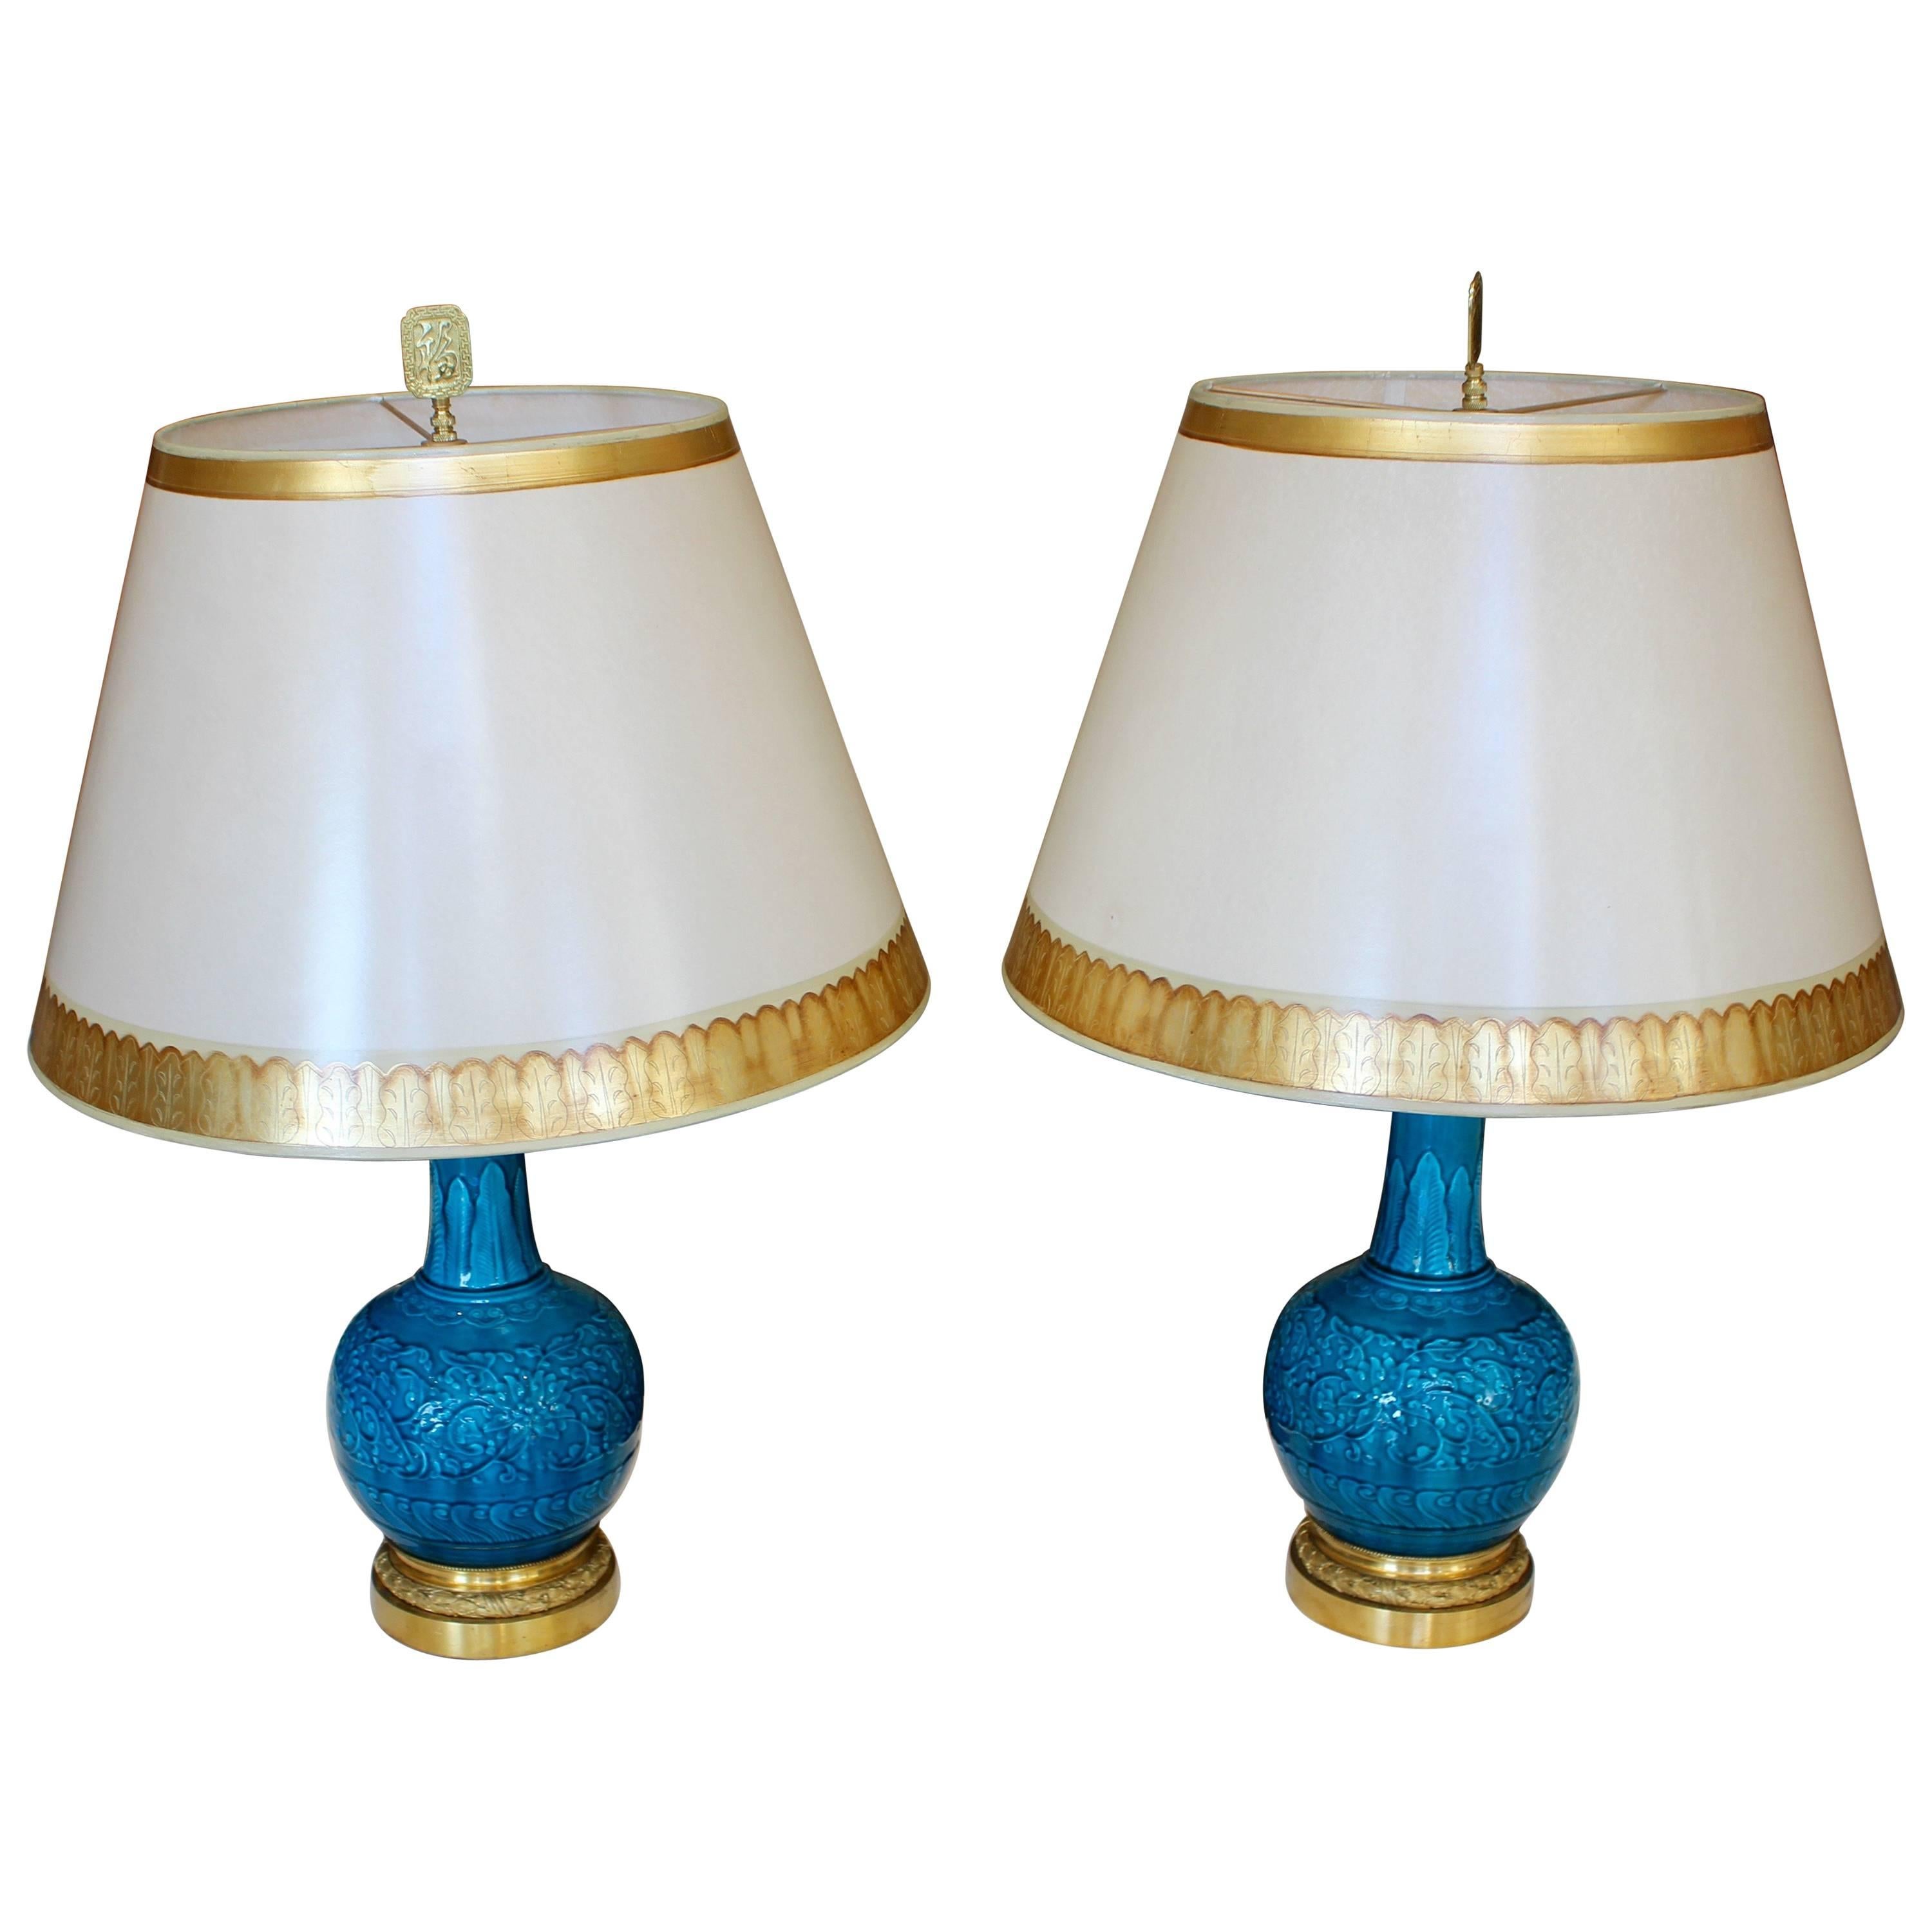 Pair of Ormolu-Mounted Theodore Deck Faience Persian-Blue Vases with Lampshades For Sale